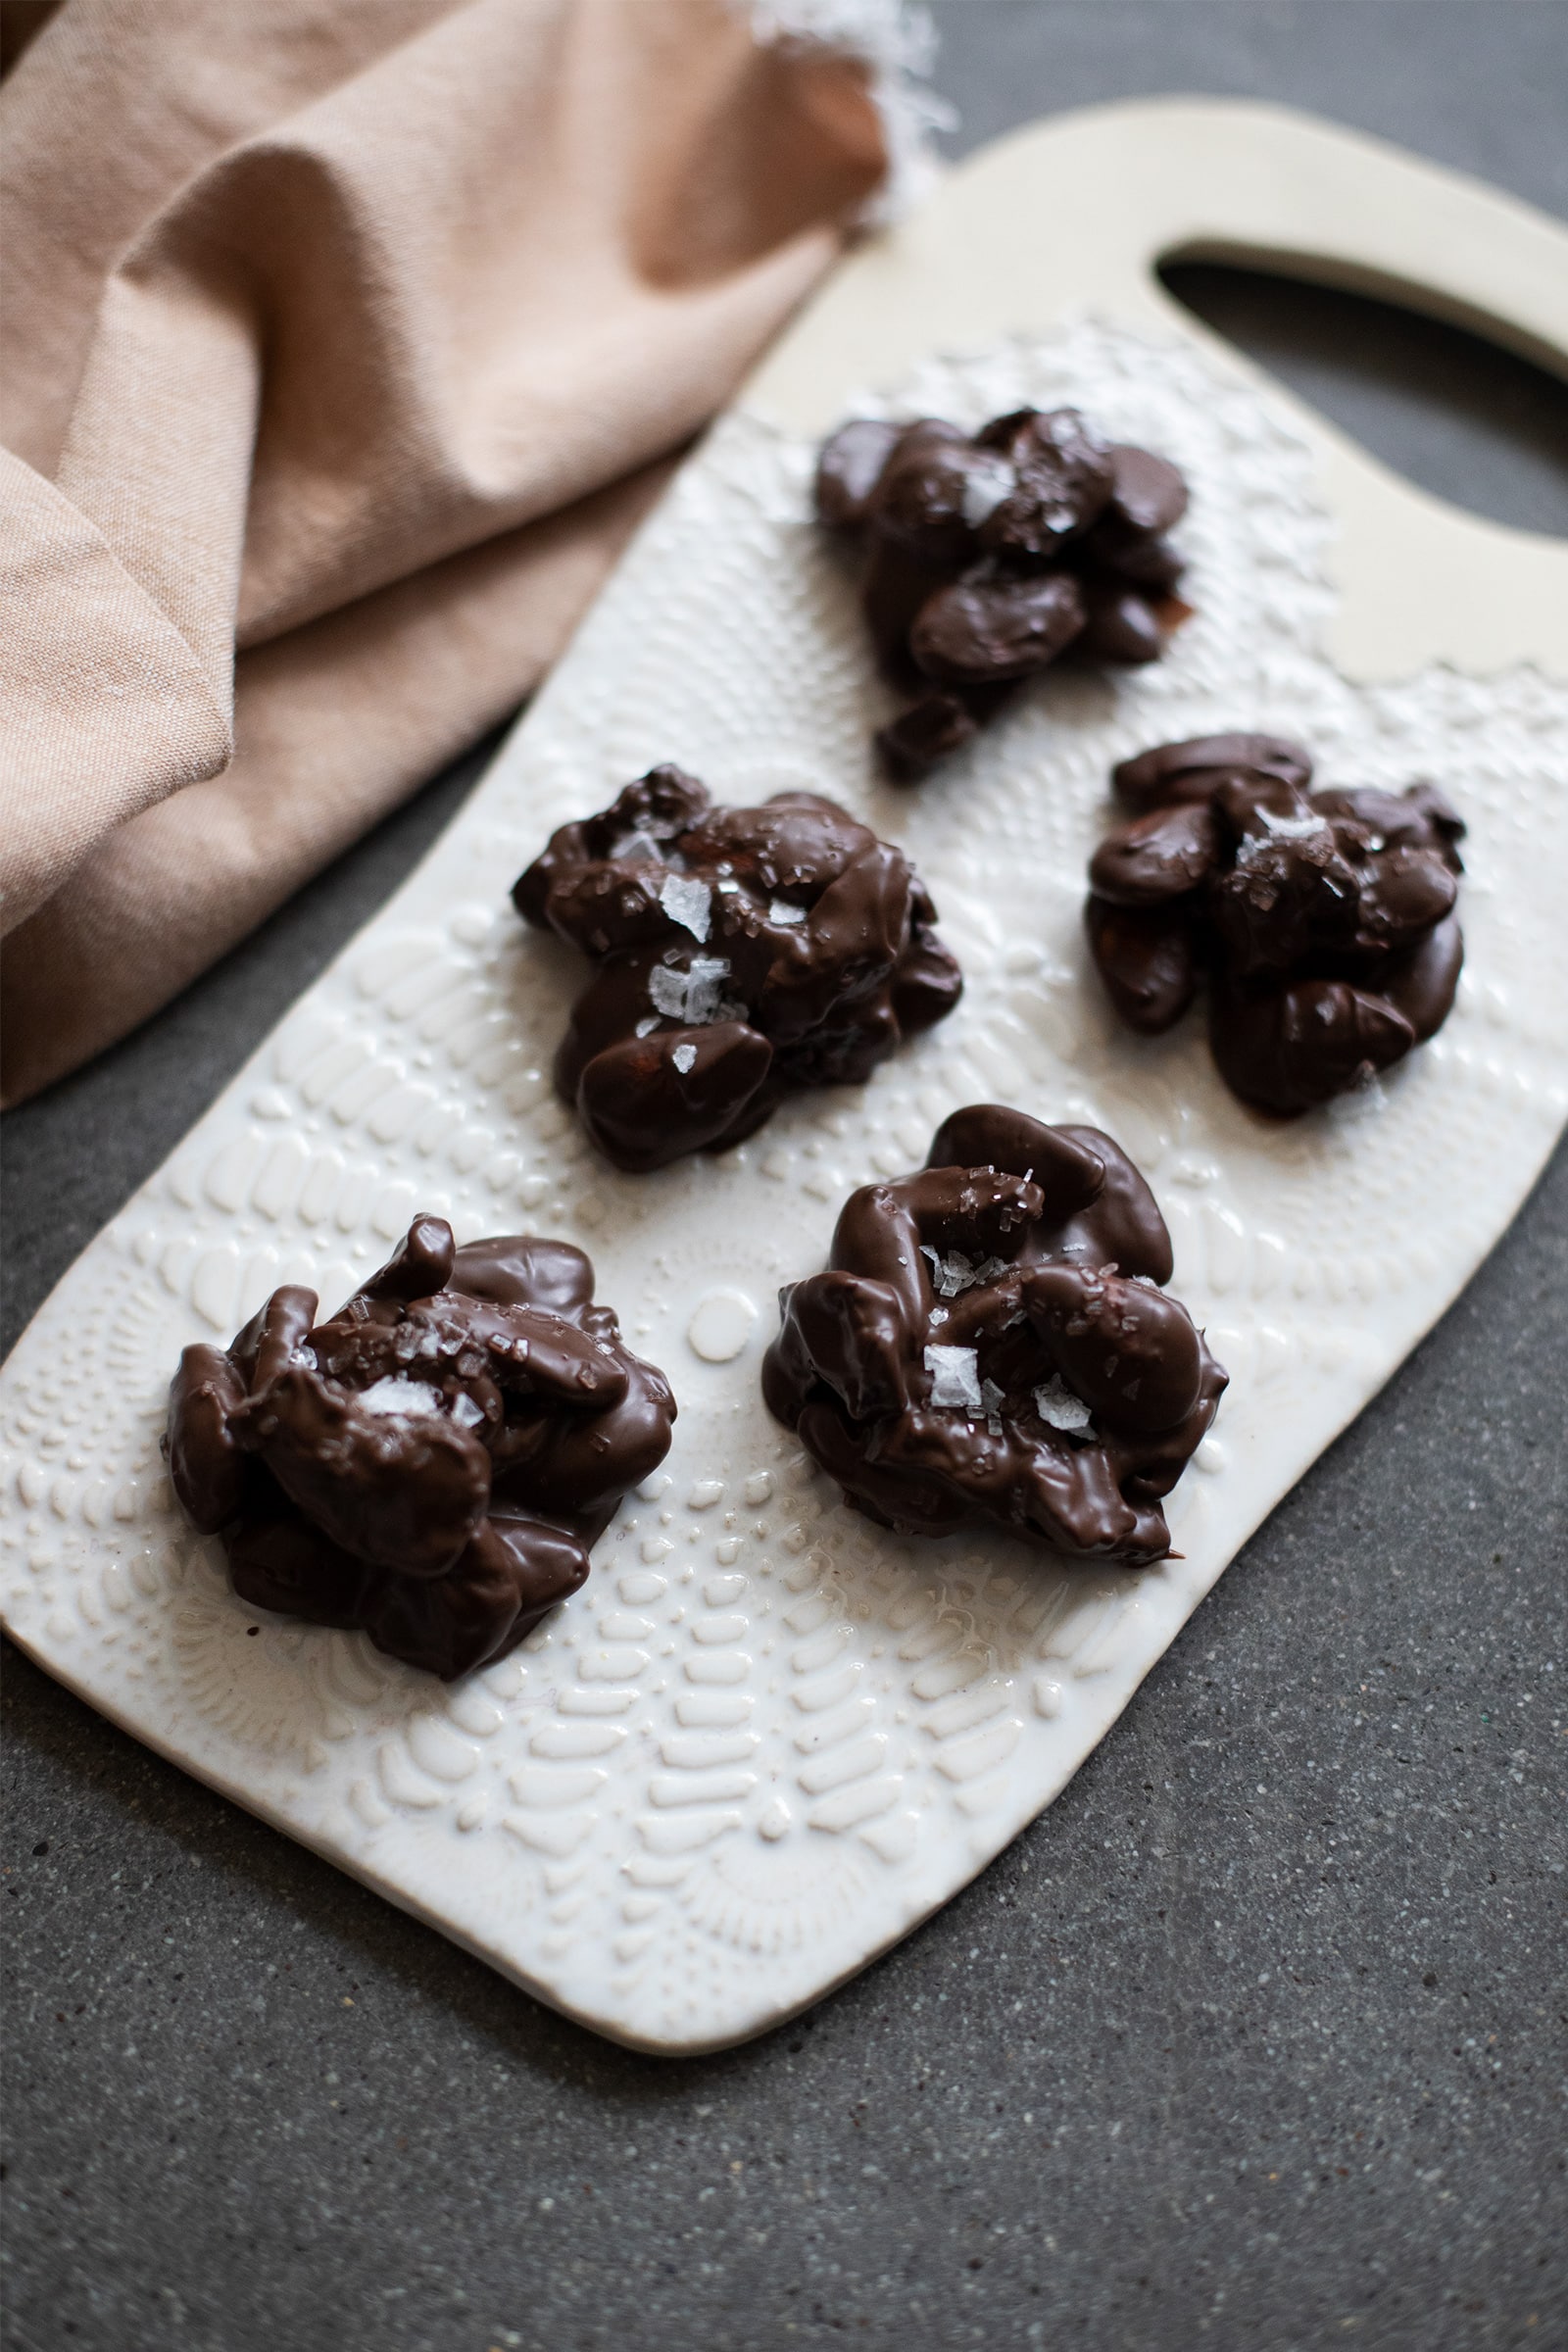 Chocolate Covered Prune And Almond Clusters Recipe